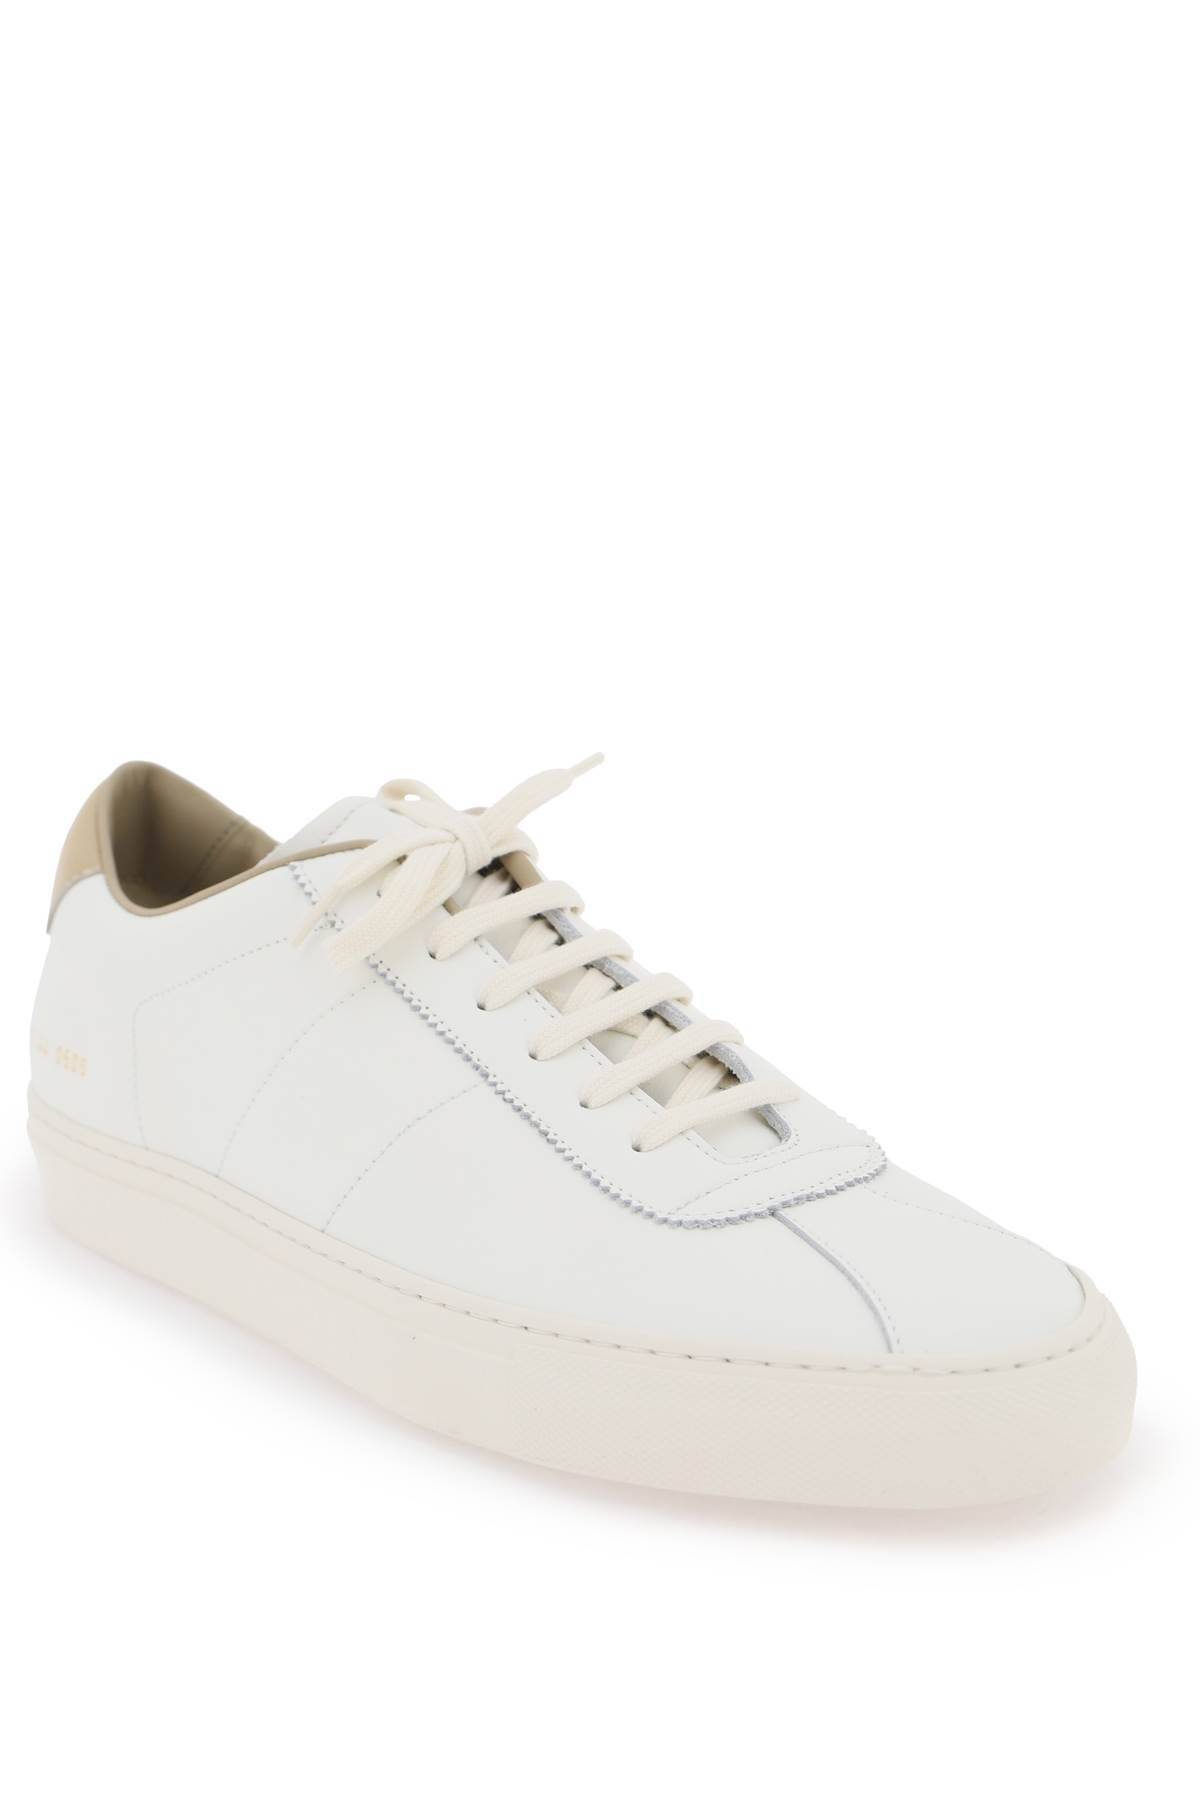 Shop Common Projects 70's Tennis Sneaker In White